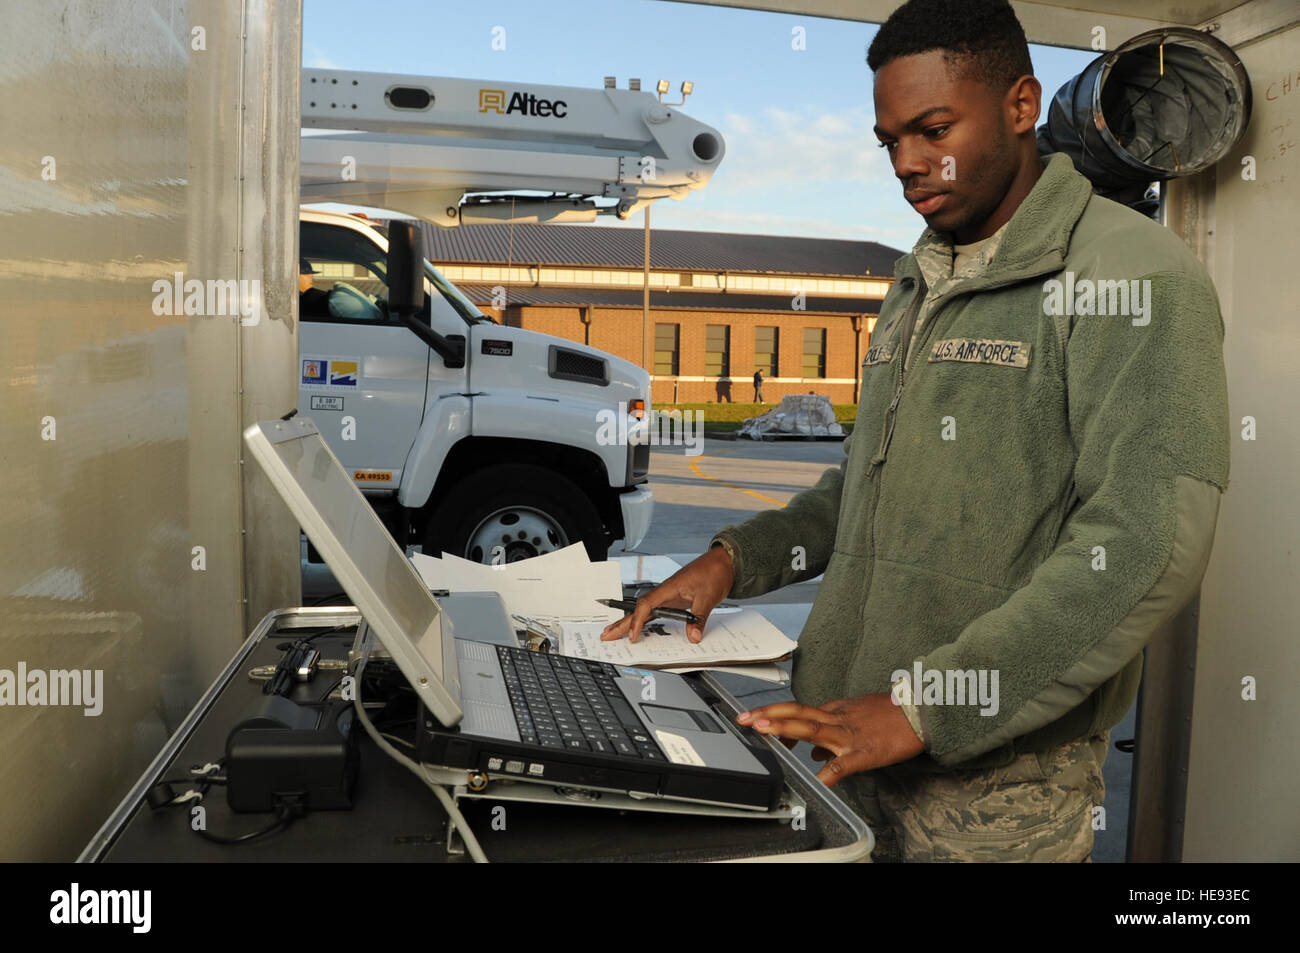 Senior Airman Marquis Cole, 305th Aerial Port Squadron aerial transportation specialist, monitors a Deployable Automated Cargo Measurement System computer, Nov. 16, 2012, as a utility and line truck passes through DACMS at Joint Base McGuire-Dix-Lakehurst, N.J., to determine if the truck's approximate size and weight. Cole is an Independence, La., native.  Staff Sgt. David Carbajal Stock Photo